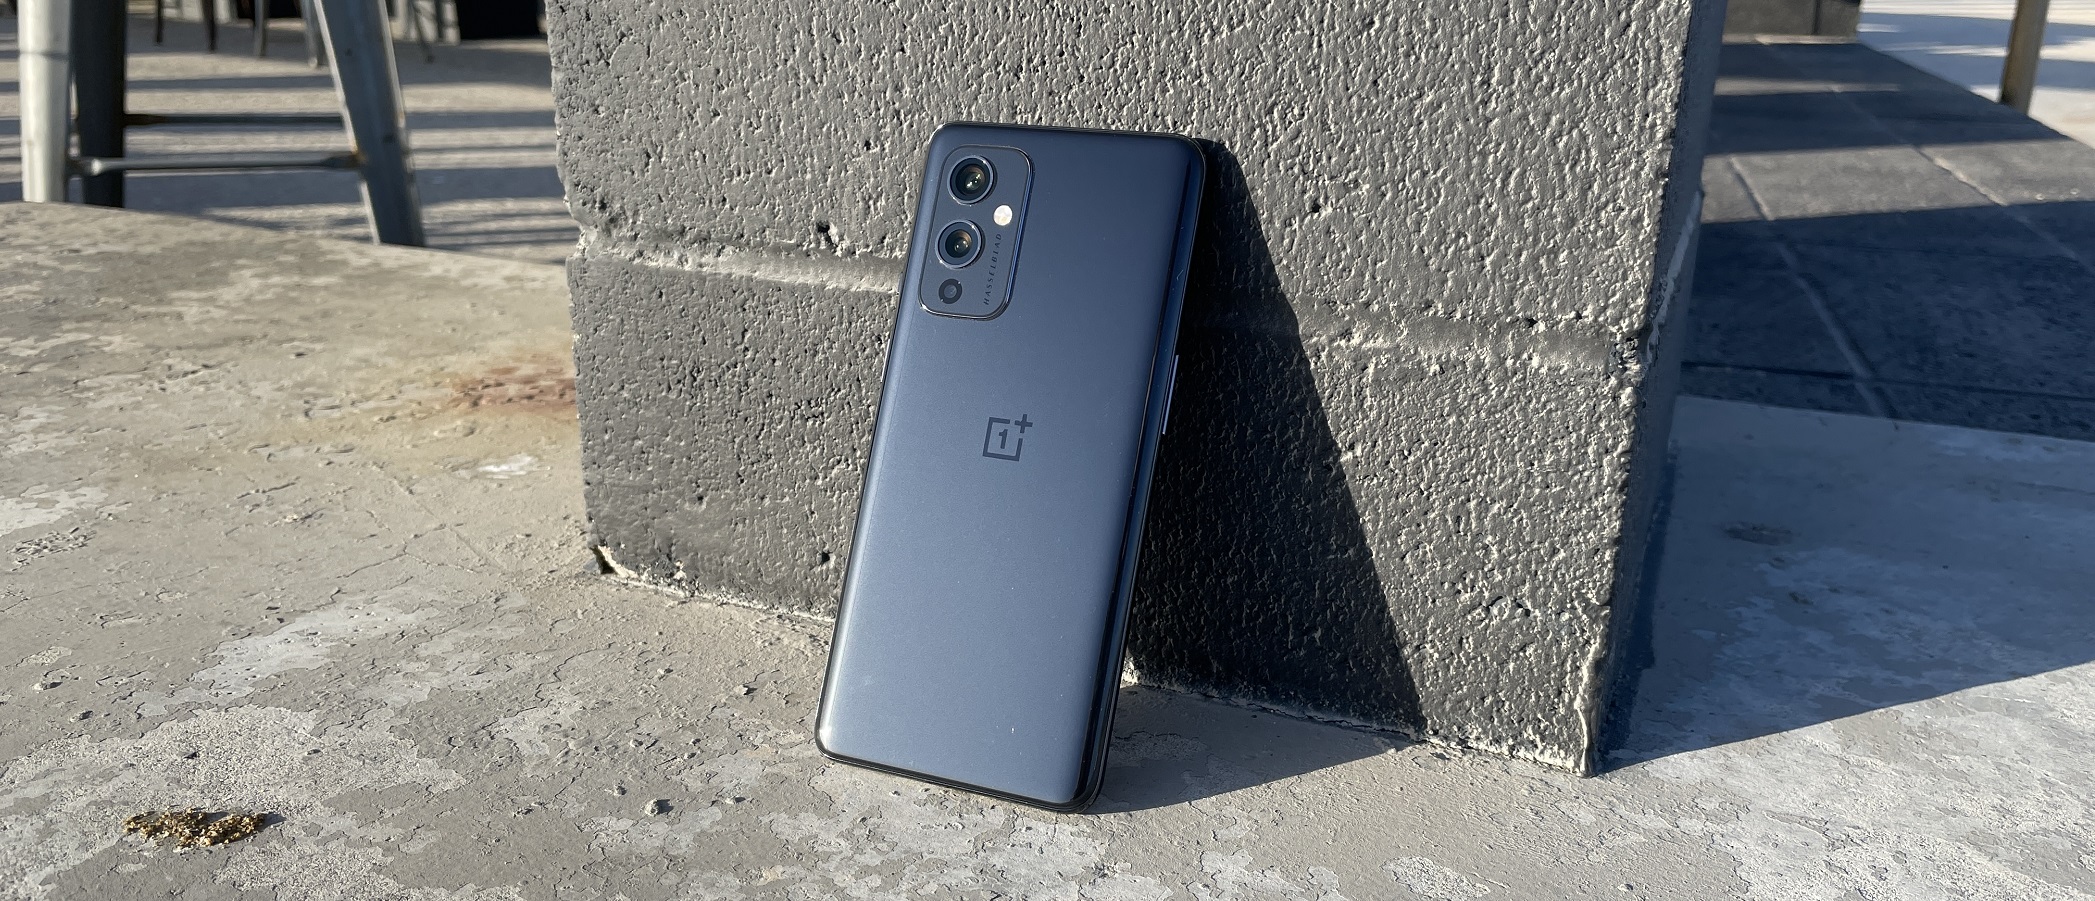 OnePlus 9 review: a great alternative Android phone | TechRadar